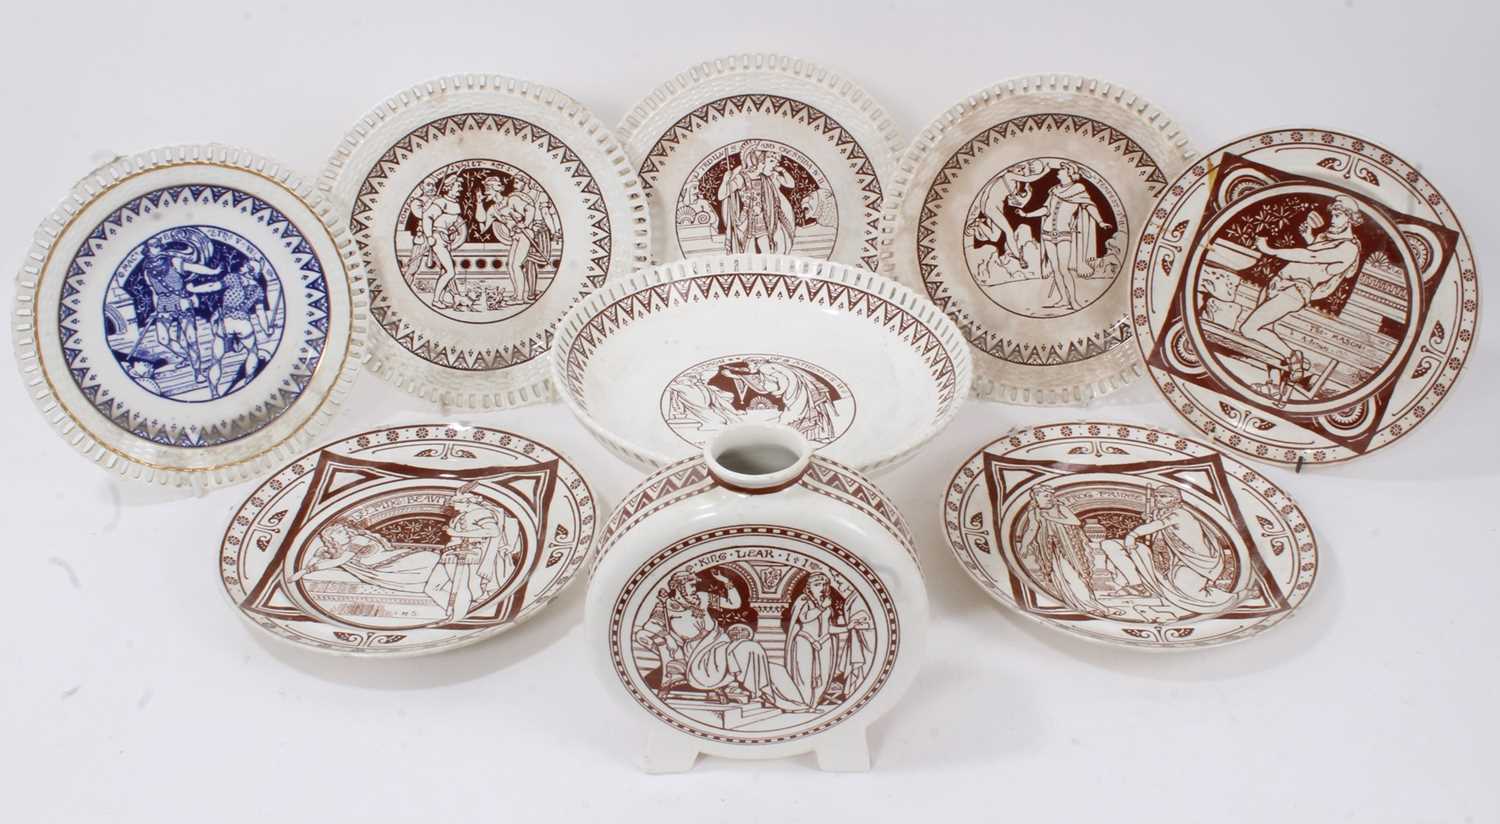 Lot 34 - Group of Minton Aesthetic style ceramics, including a moonflask, plates and a footed dish, printed in brown (one in blue) with scenes from Shakespeare and children's tales (9)